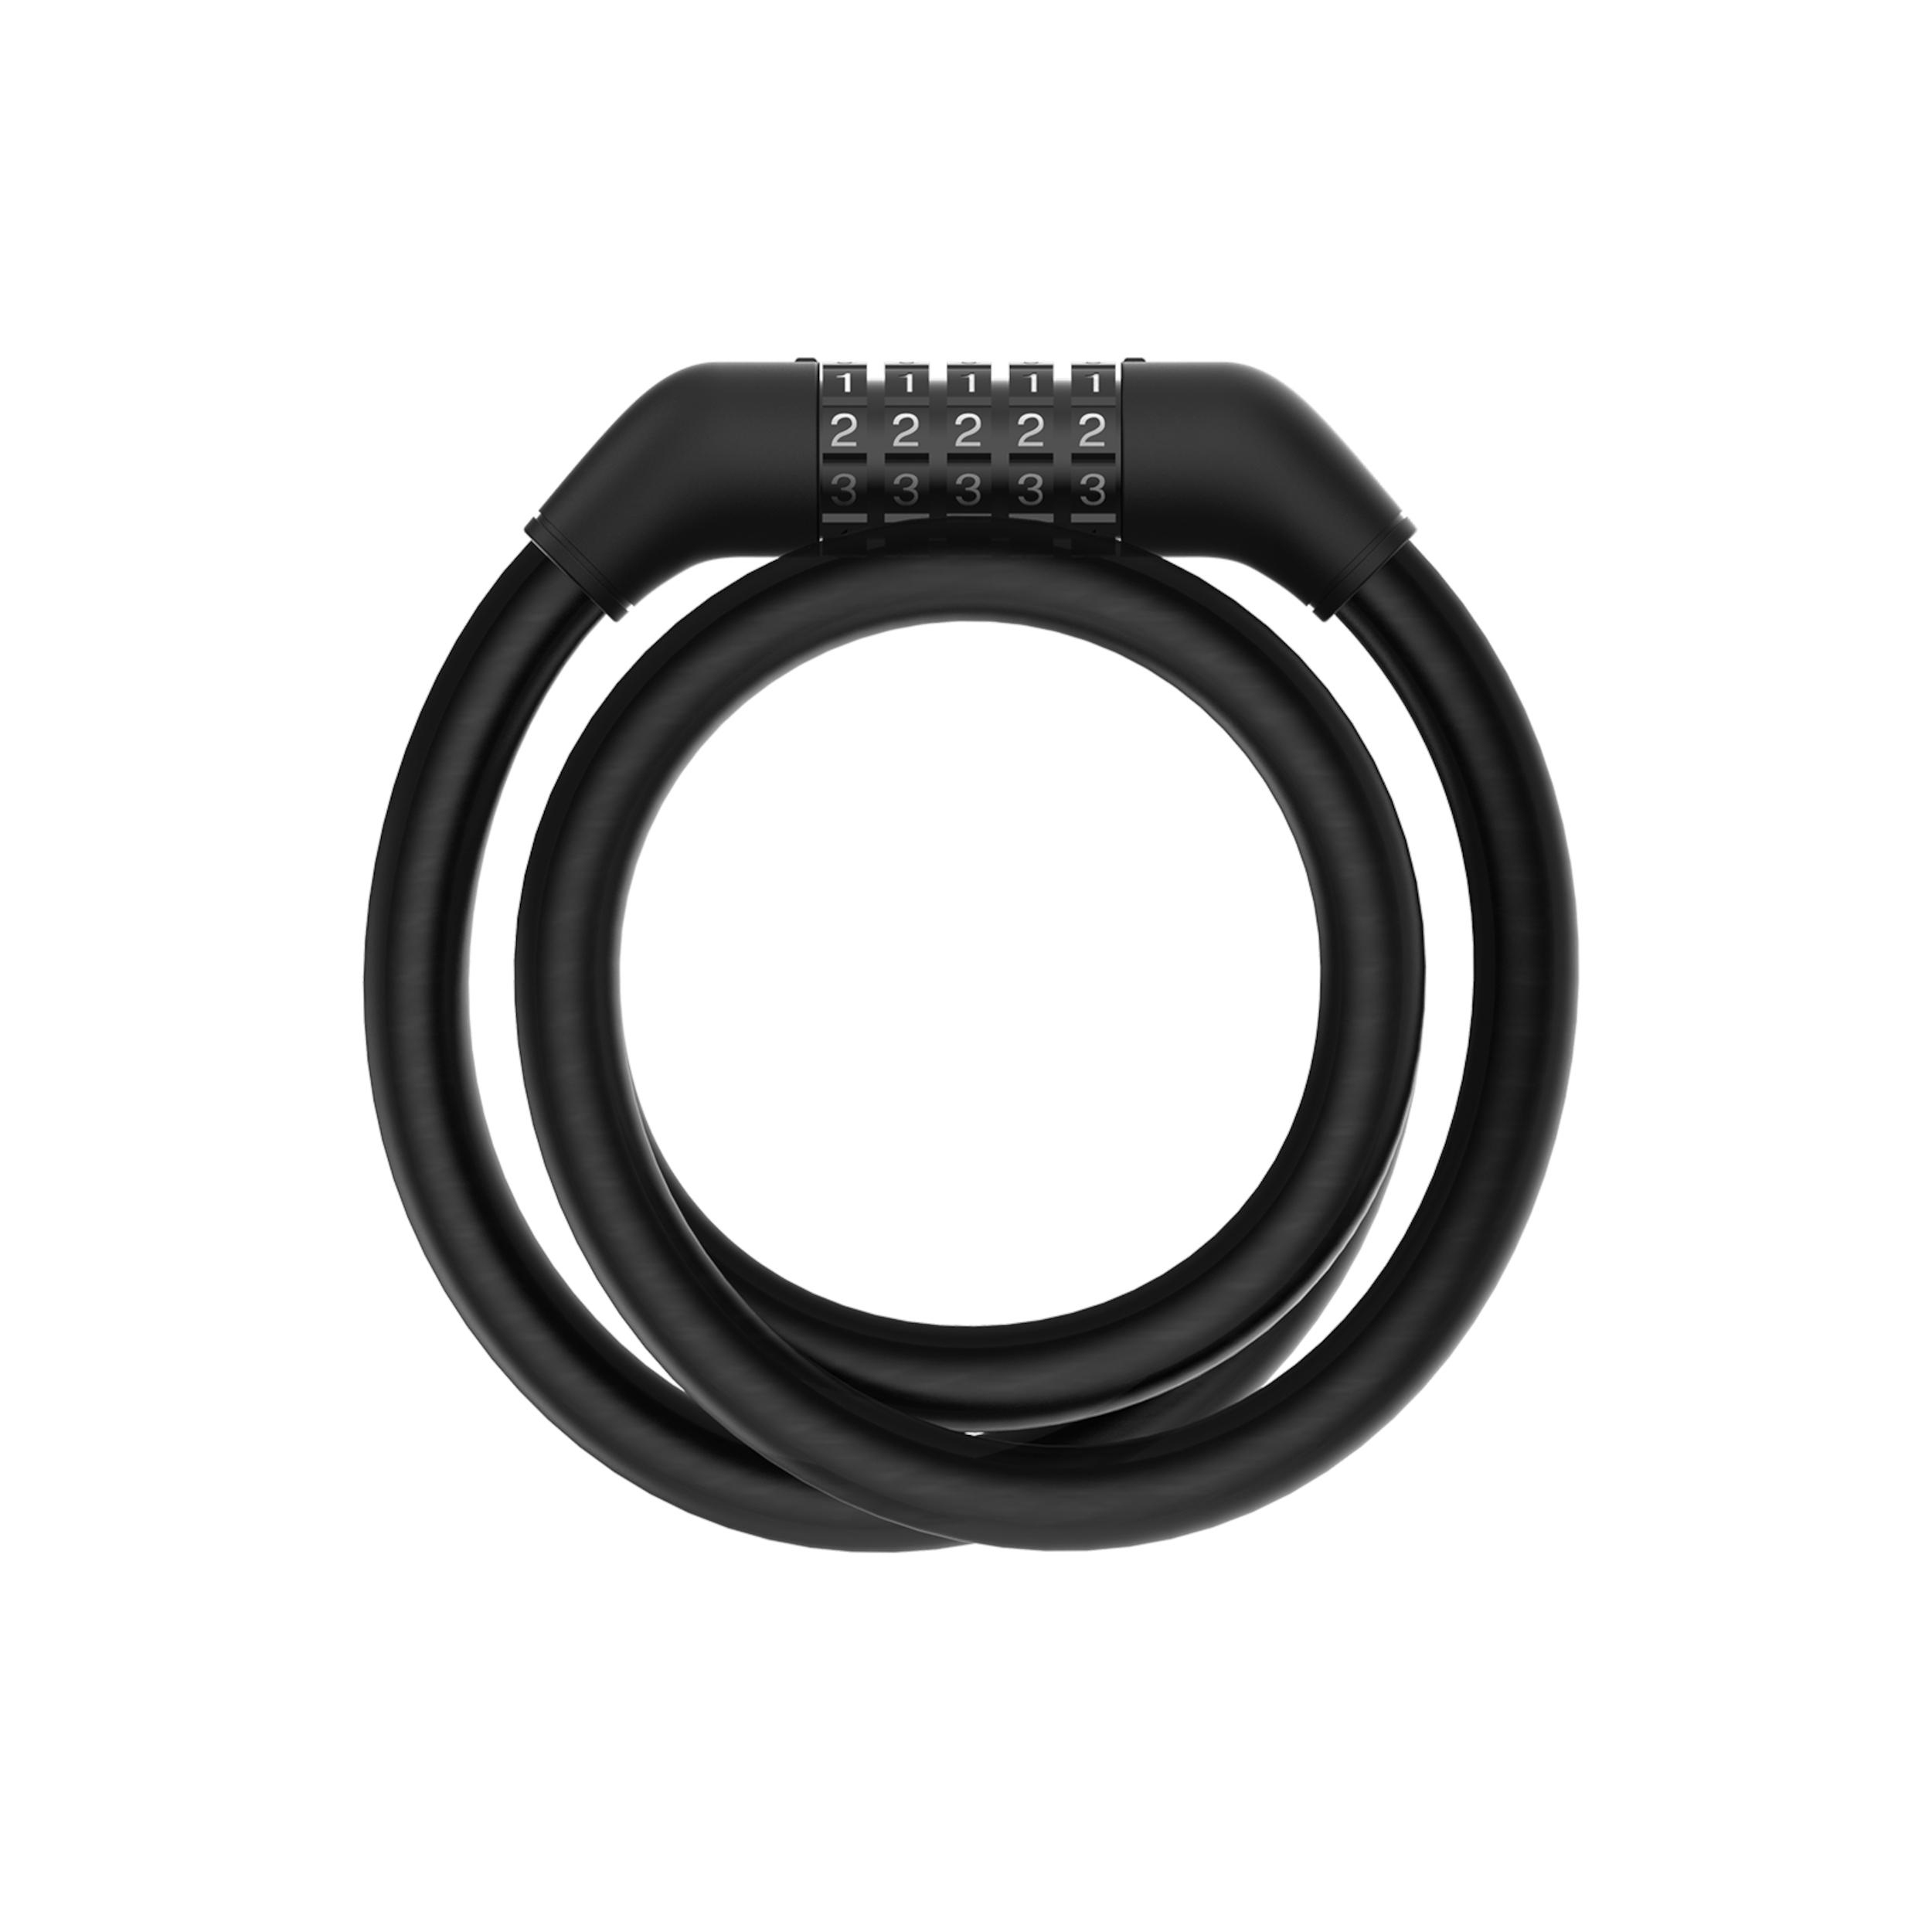 XIAOMI Electric Scooter (Black) Lock Cable Fahrradschloss